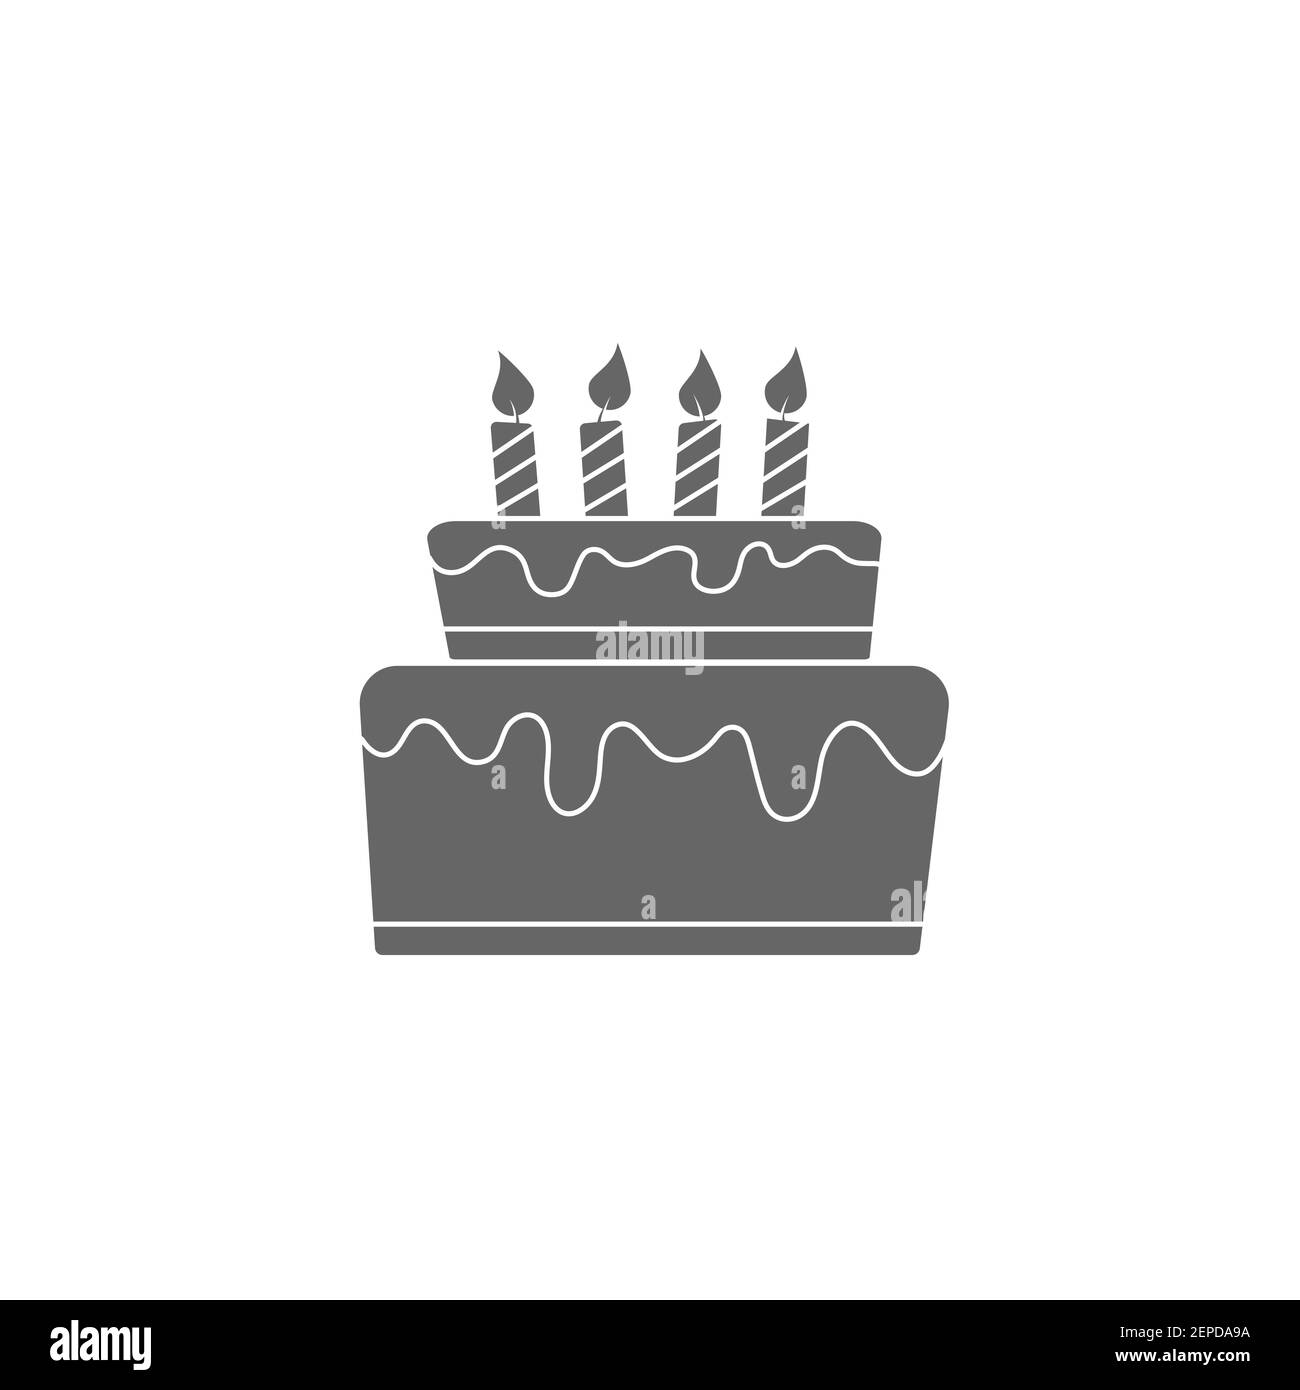 Cake Silhouette Vector Images over 14000